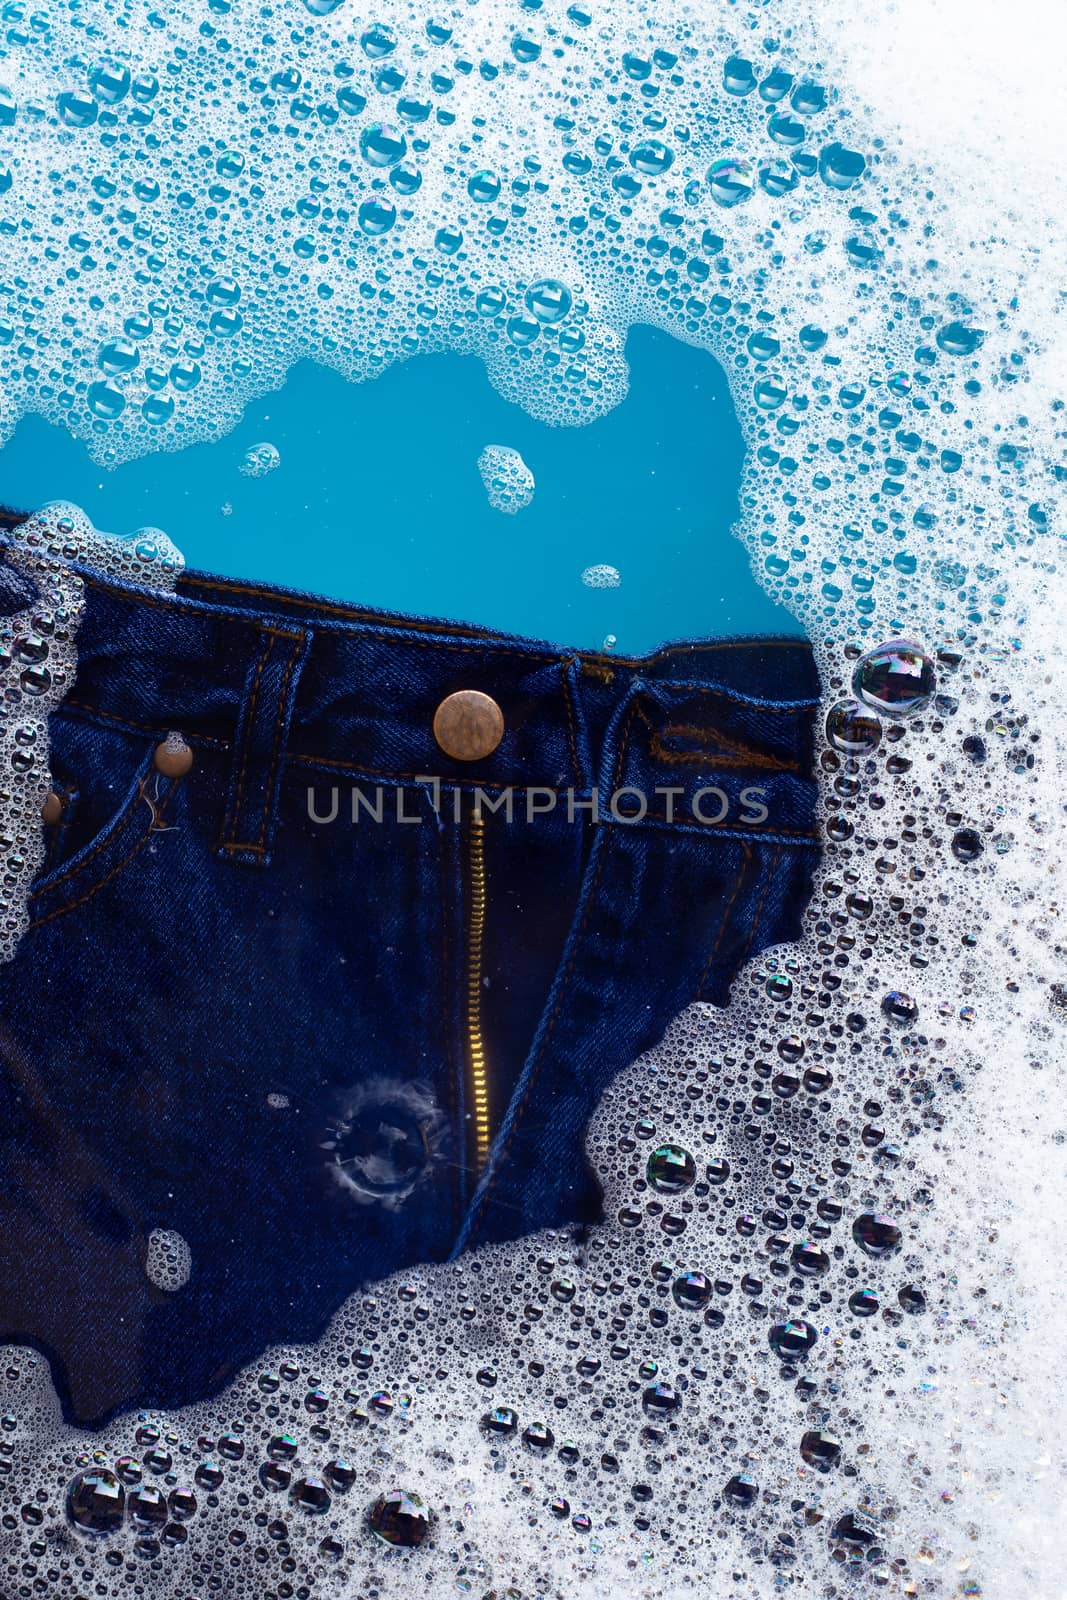 Jeans soak in powder detergent water dissolution. Laundry concep by Bowonpat